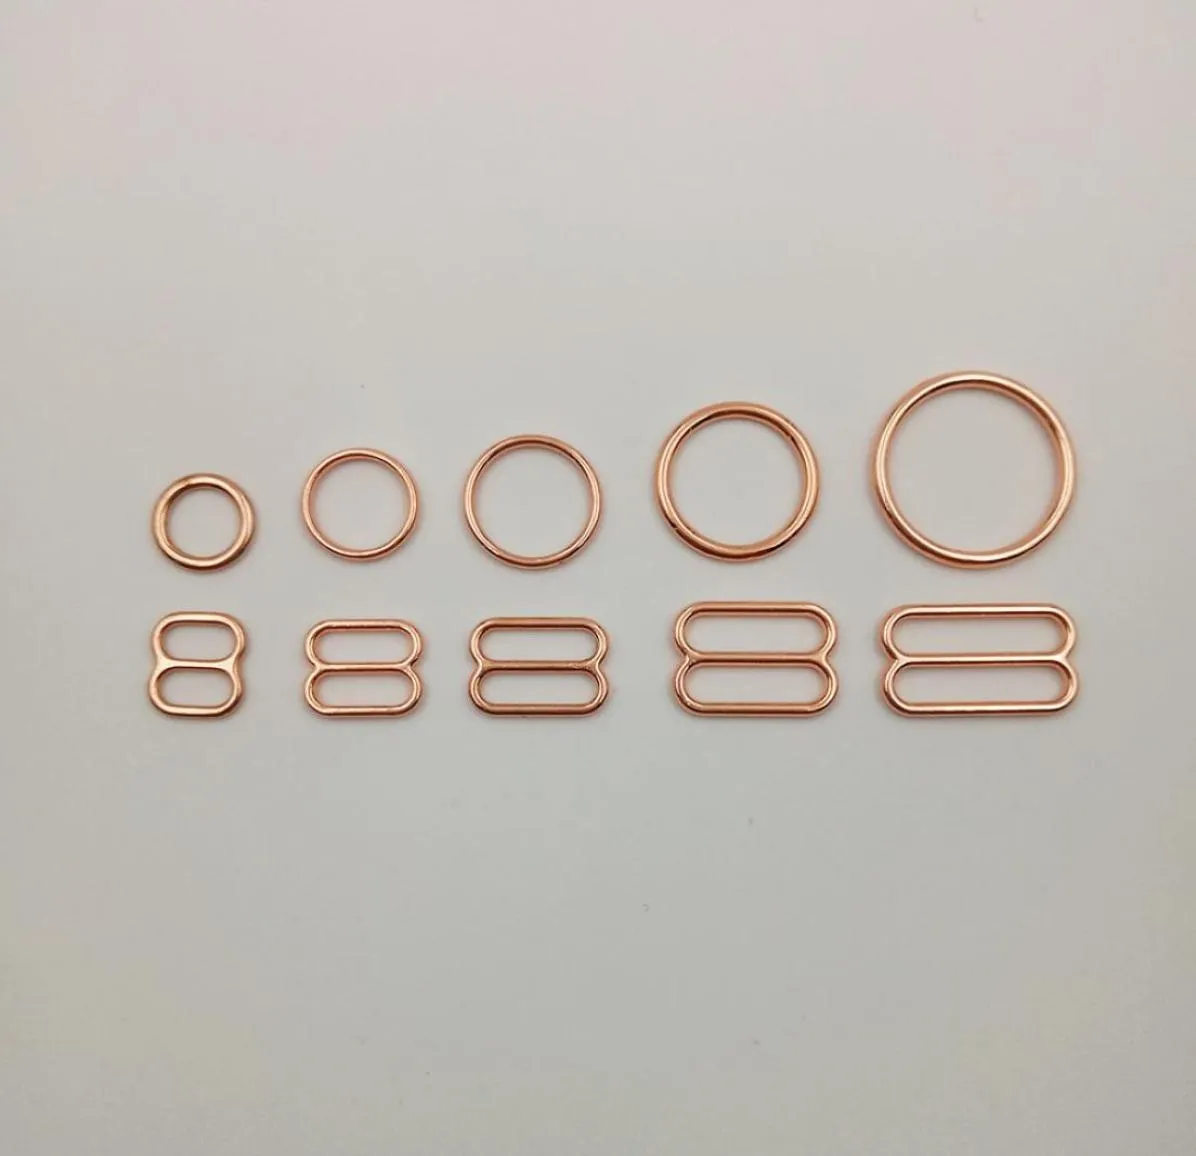 Sewing notions bra rings and sliders strap adjustment buckle in rose gold8315366